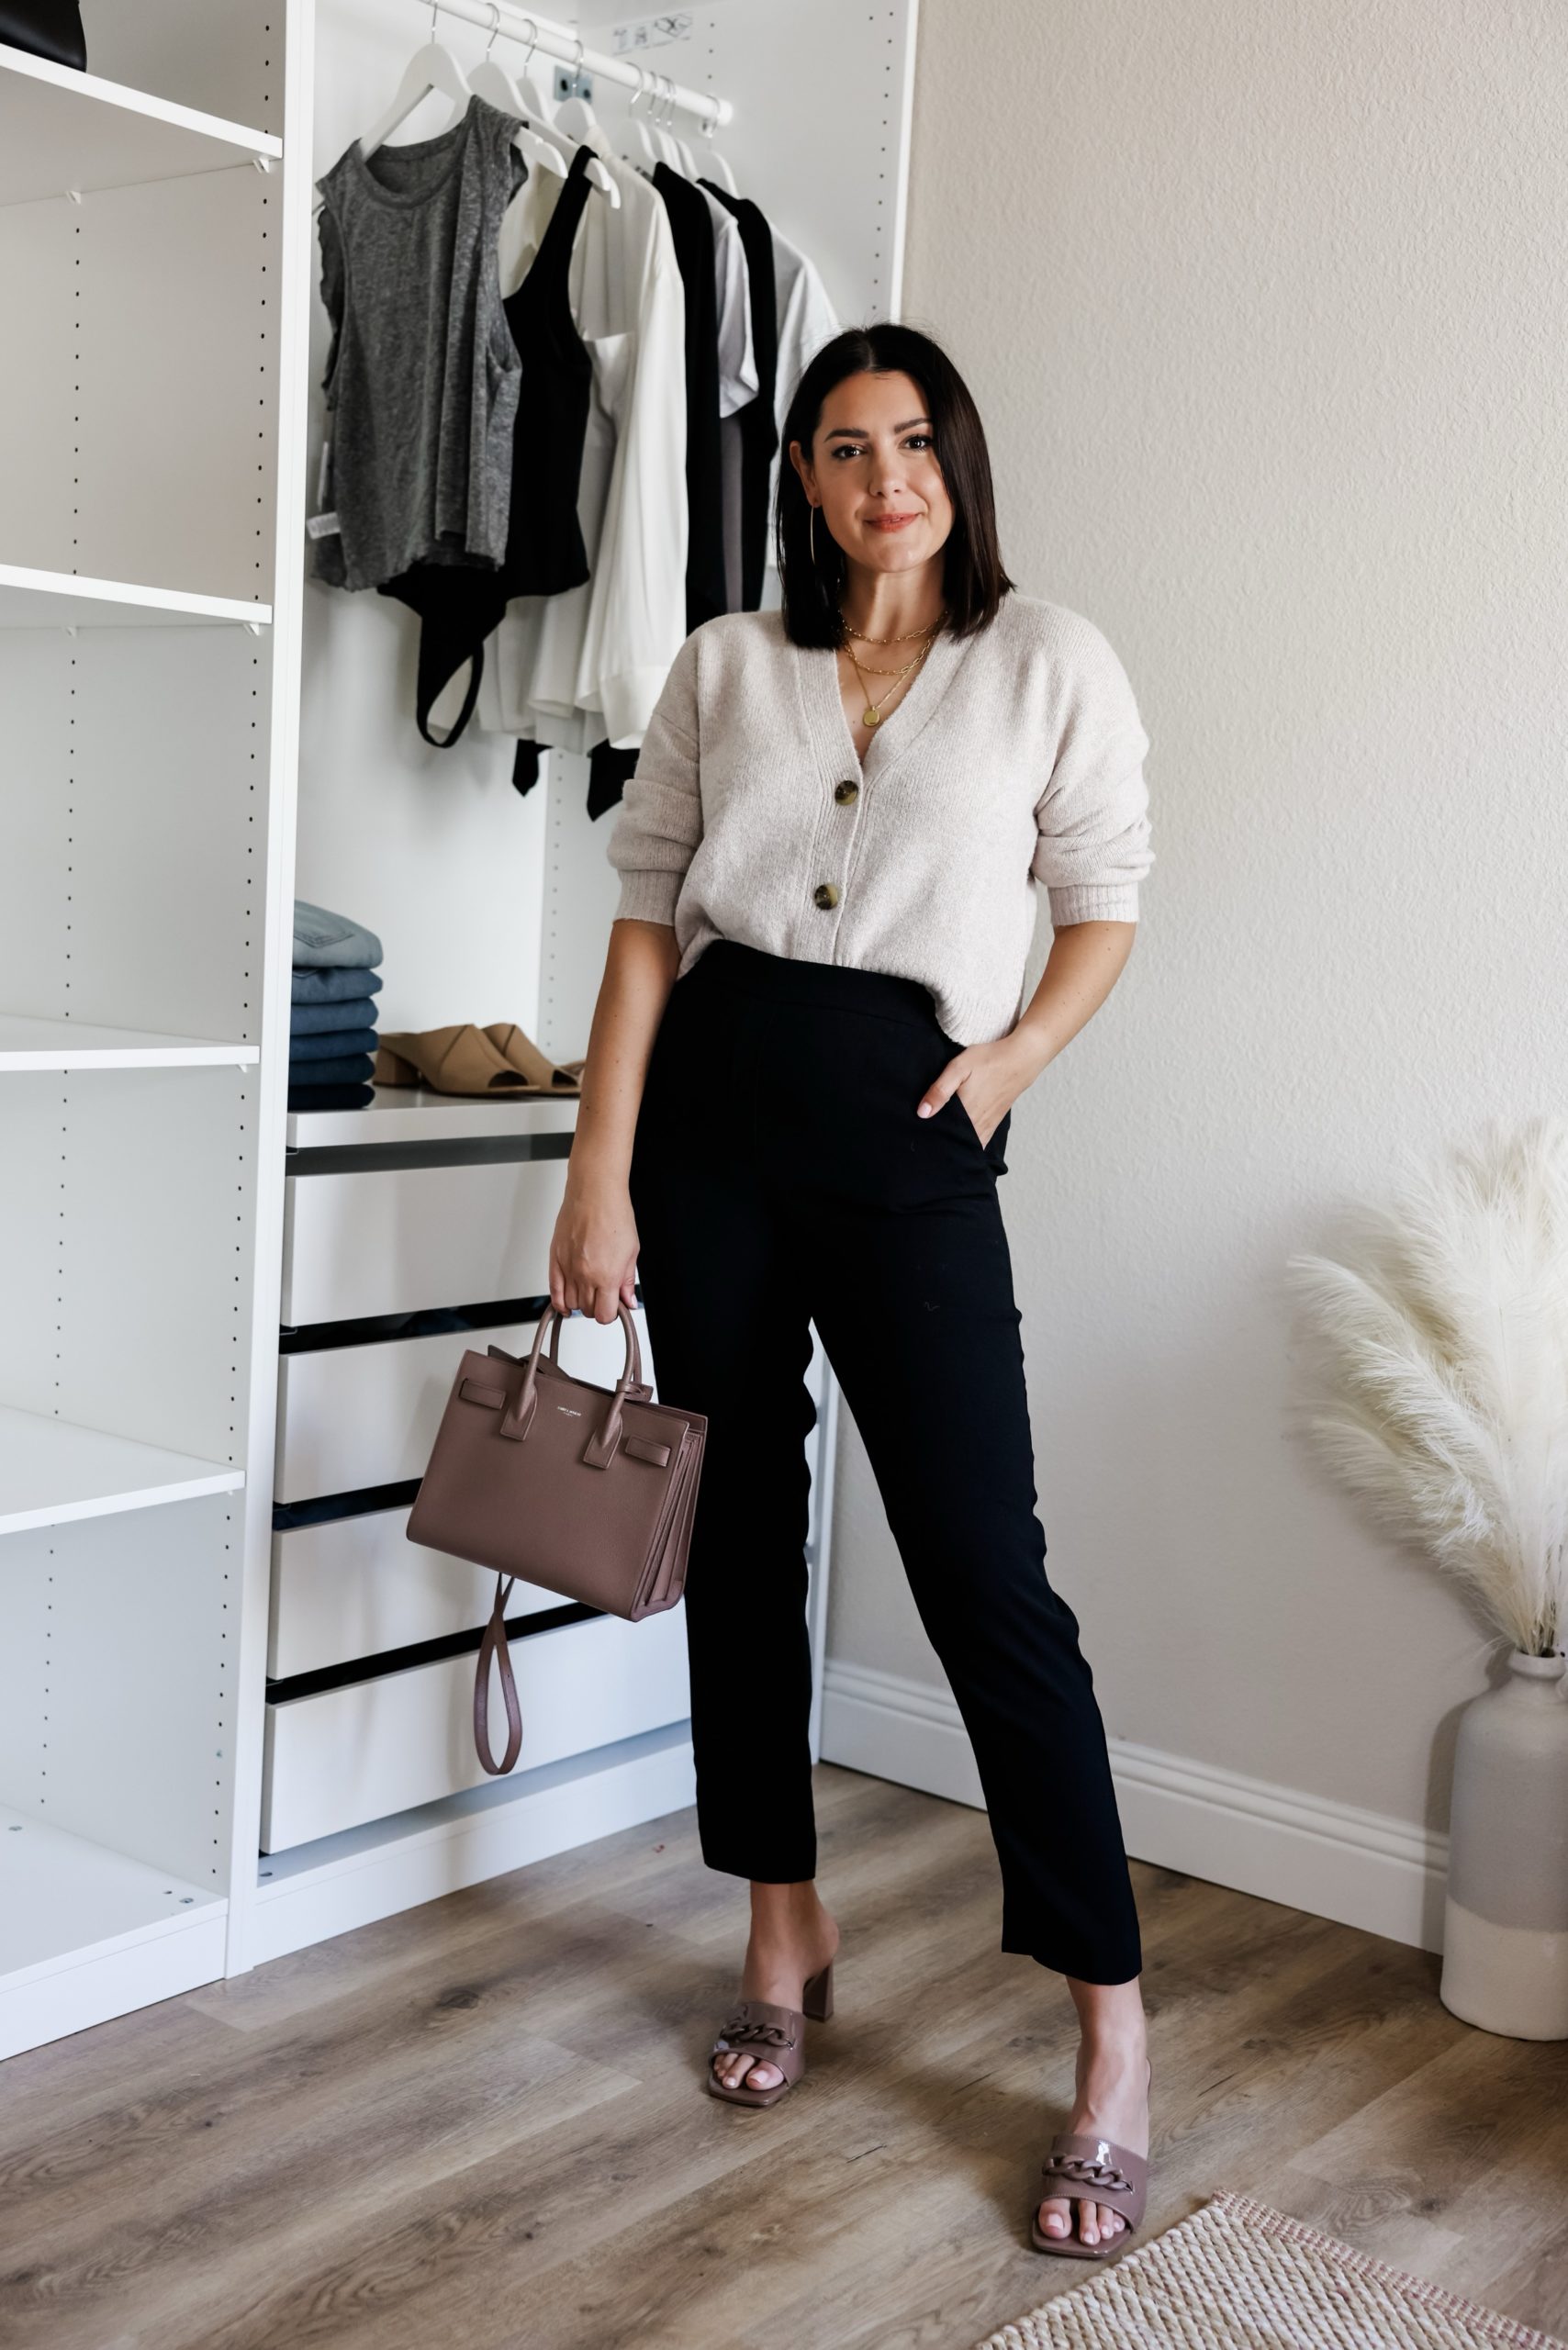 https://www.kendieveryday.com/wp-content/uploads/2021/08/Kendi-Everyday-wearing-a-cropped-cardigan-and-black-cropped-pants-from-Nordstrom-scaled.jpg